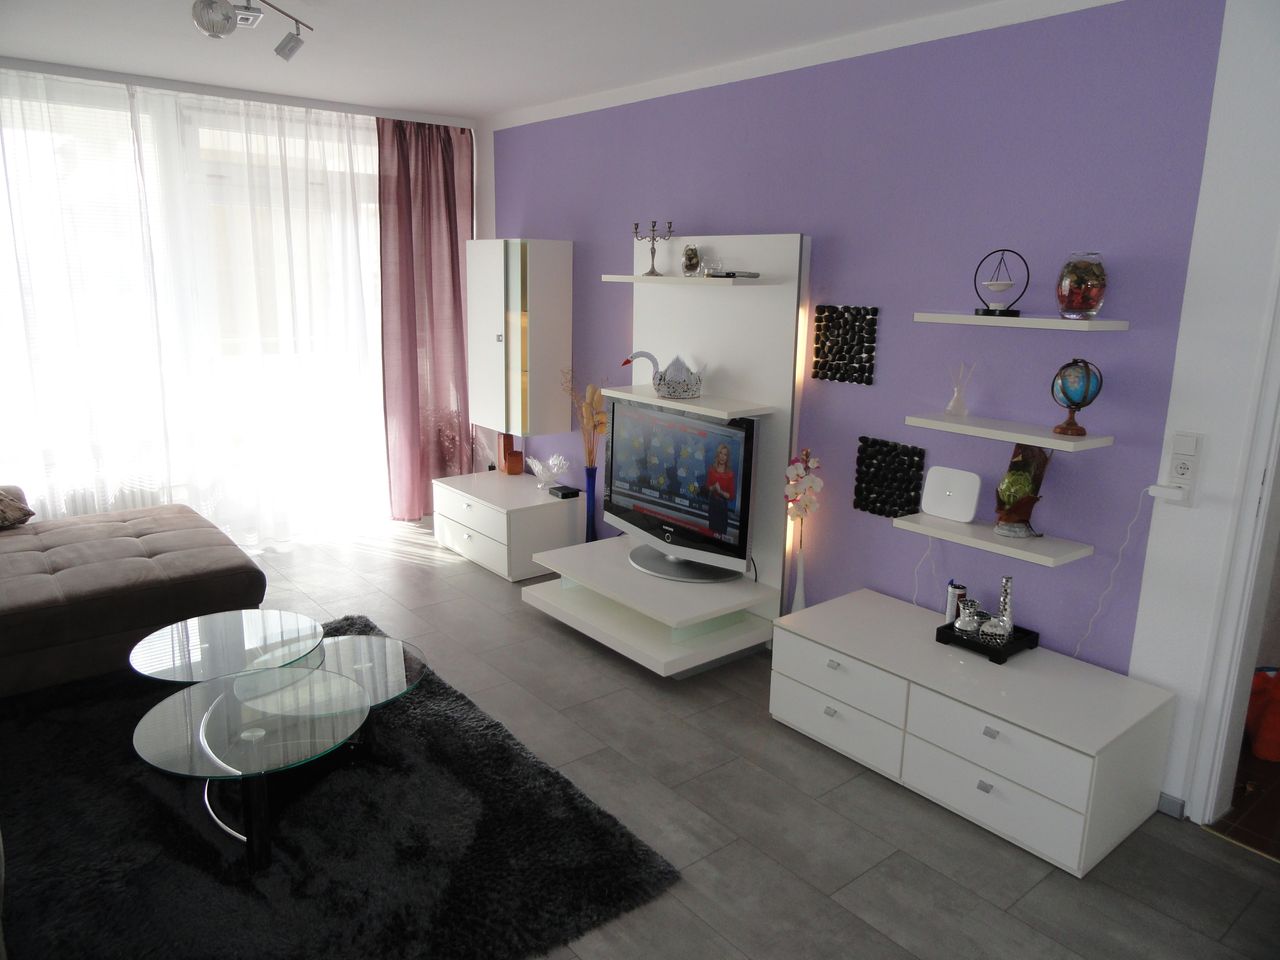 Spacious apartment in Bornheim with large balcony and view of the skyline, top infrastructure